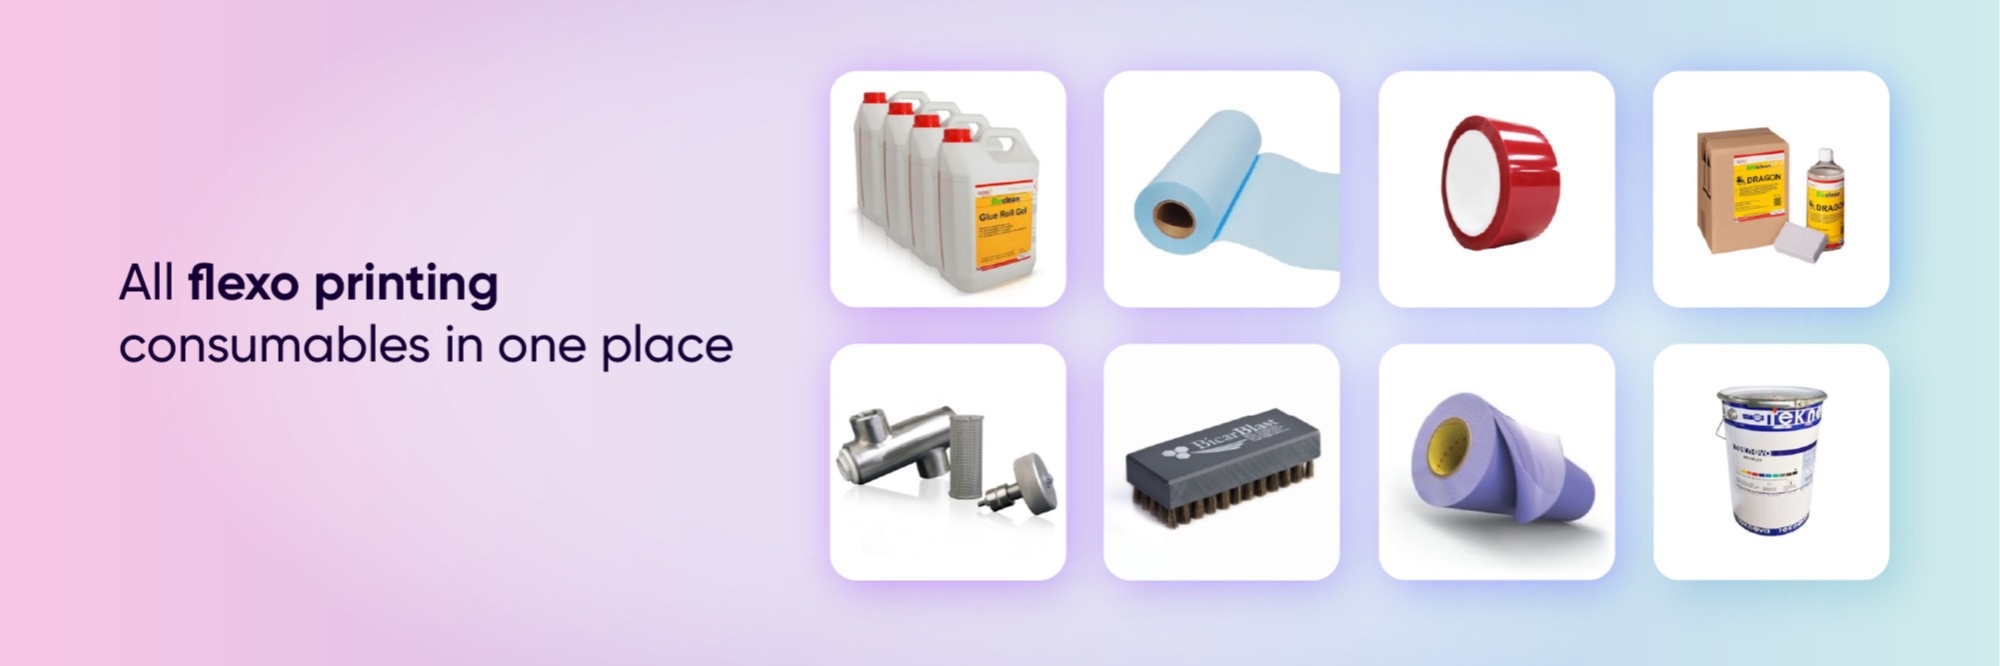 All flexo printing consumables in one place